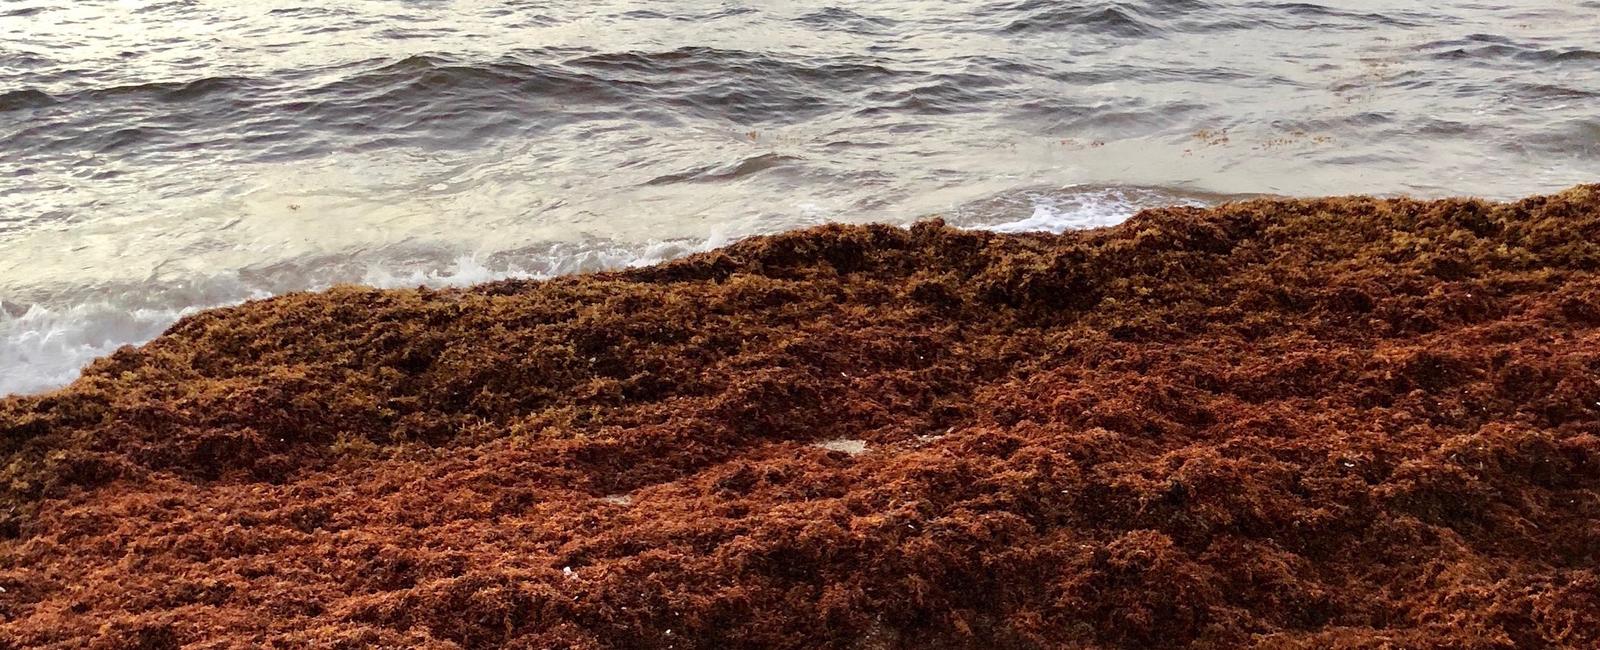 Since 1973 it has been illegal to pick up seaweed on new hampshire beaches at night